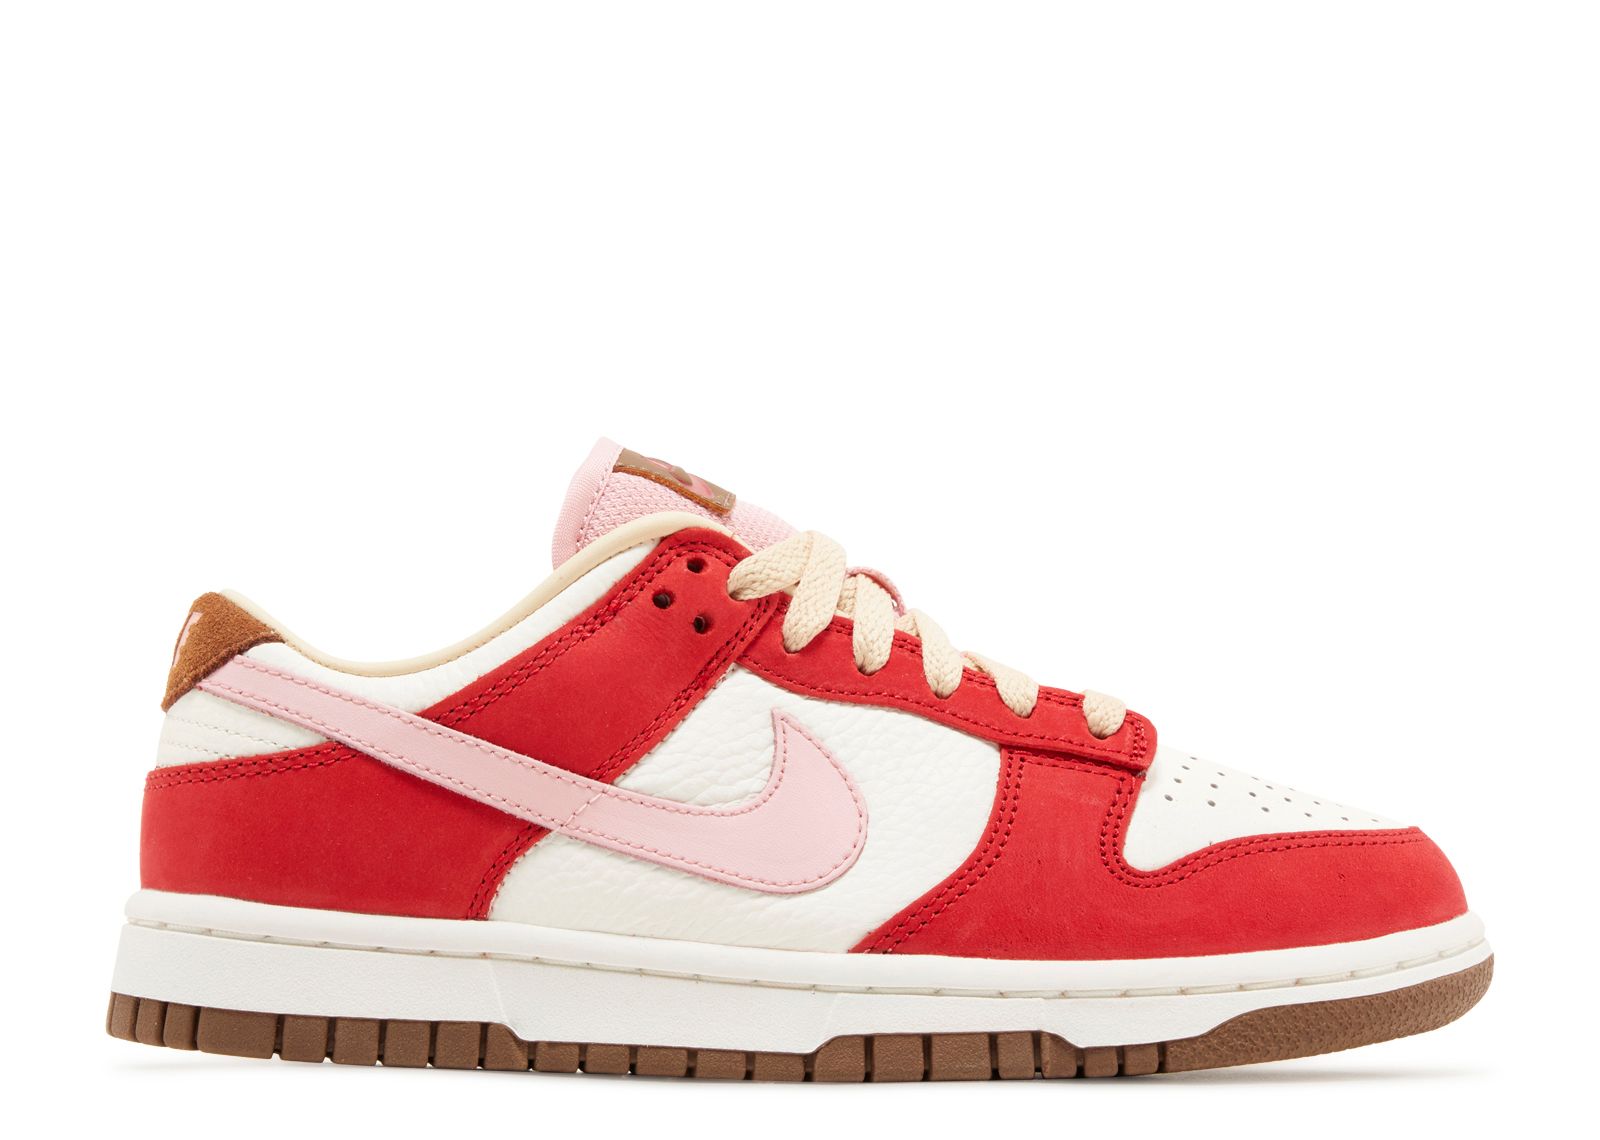 Wmns Dunk Low 'Pink Oxford' - Nike - DD1503 601 - pink oxford